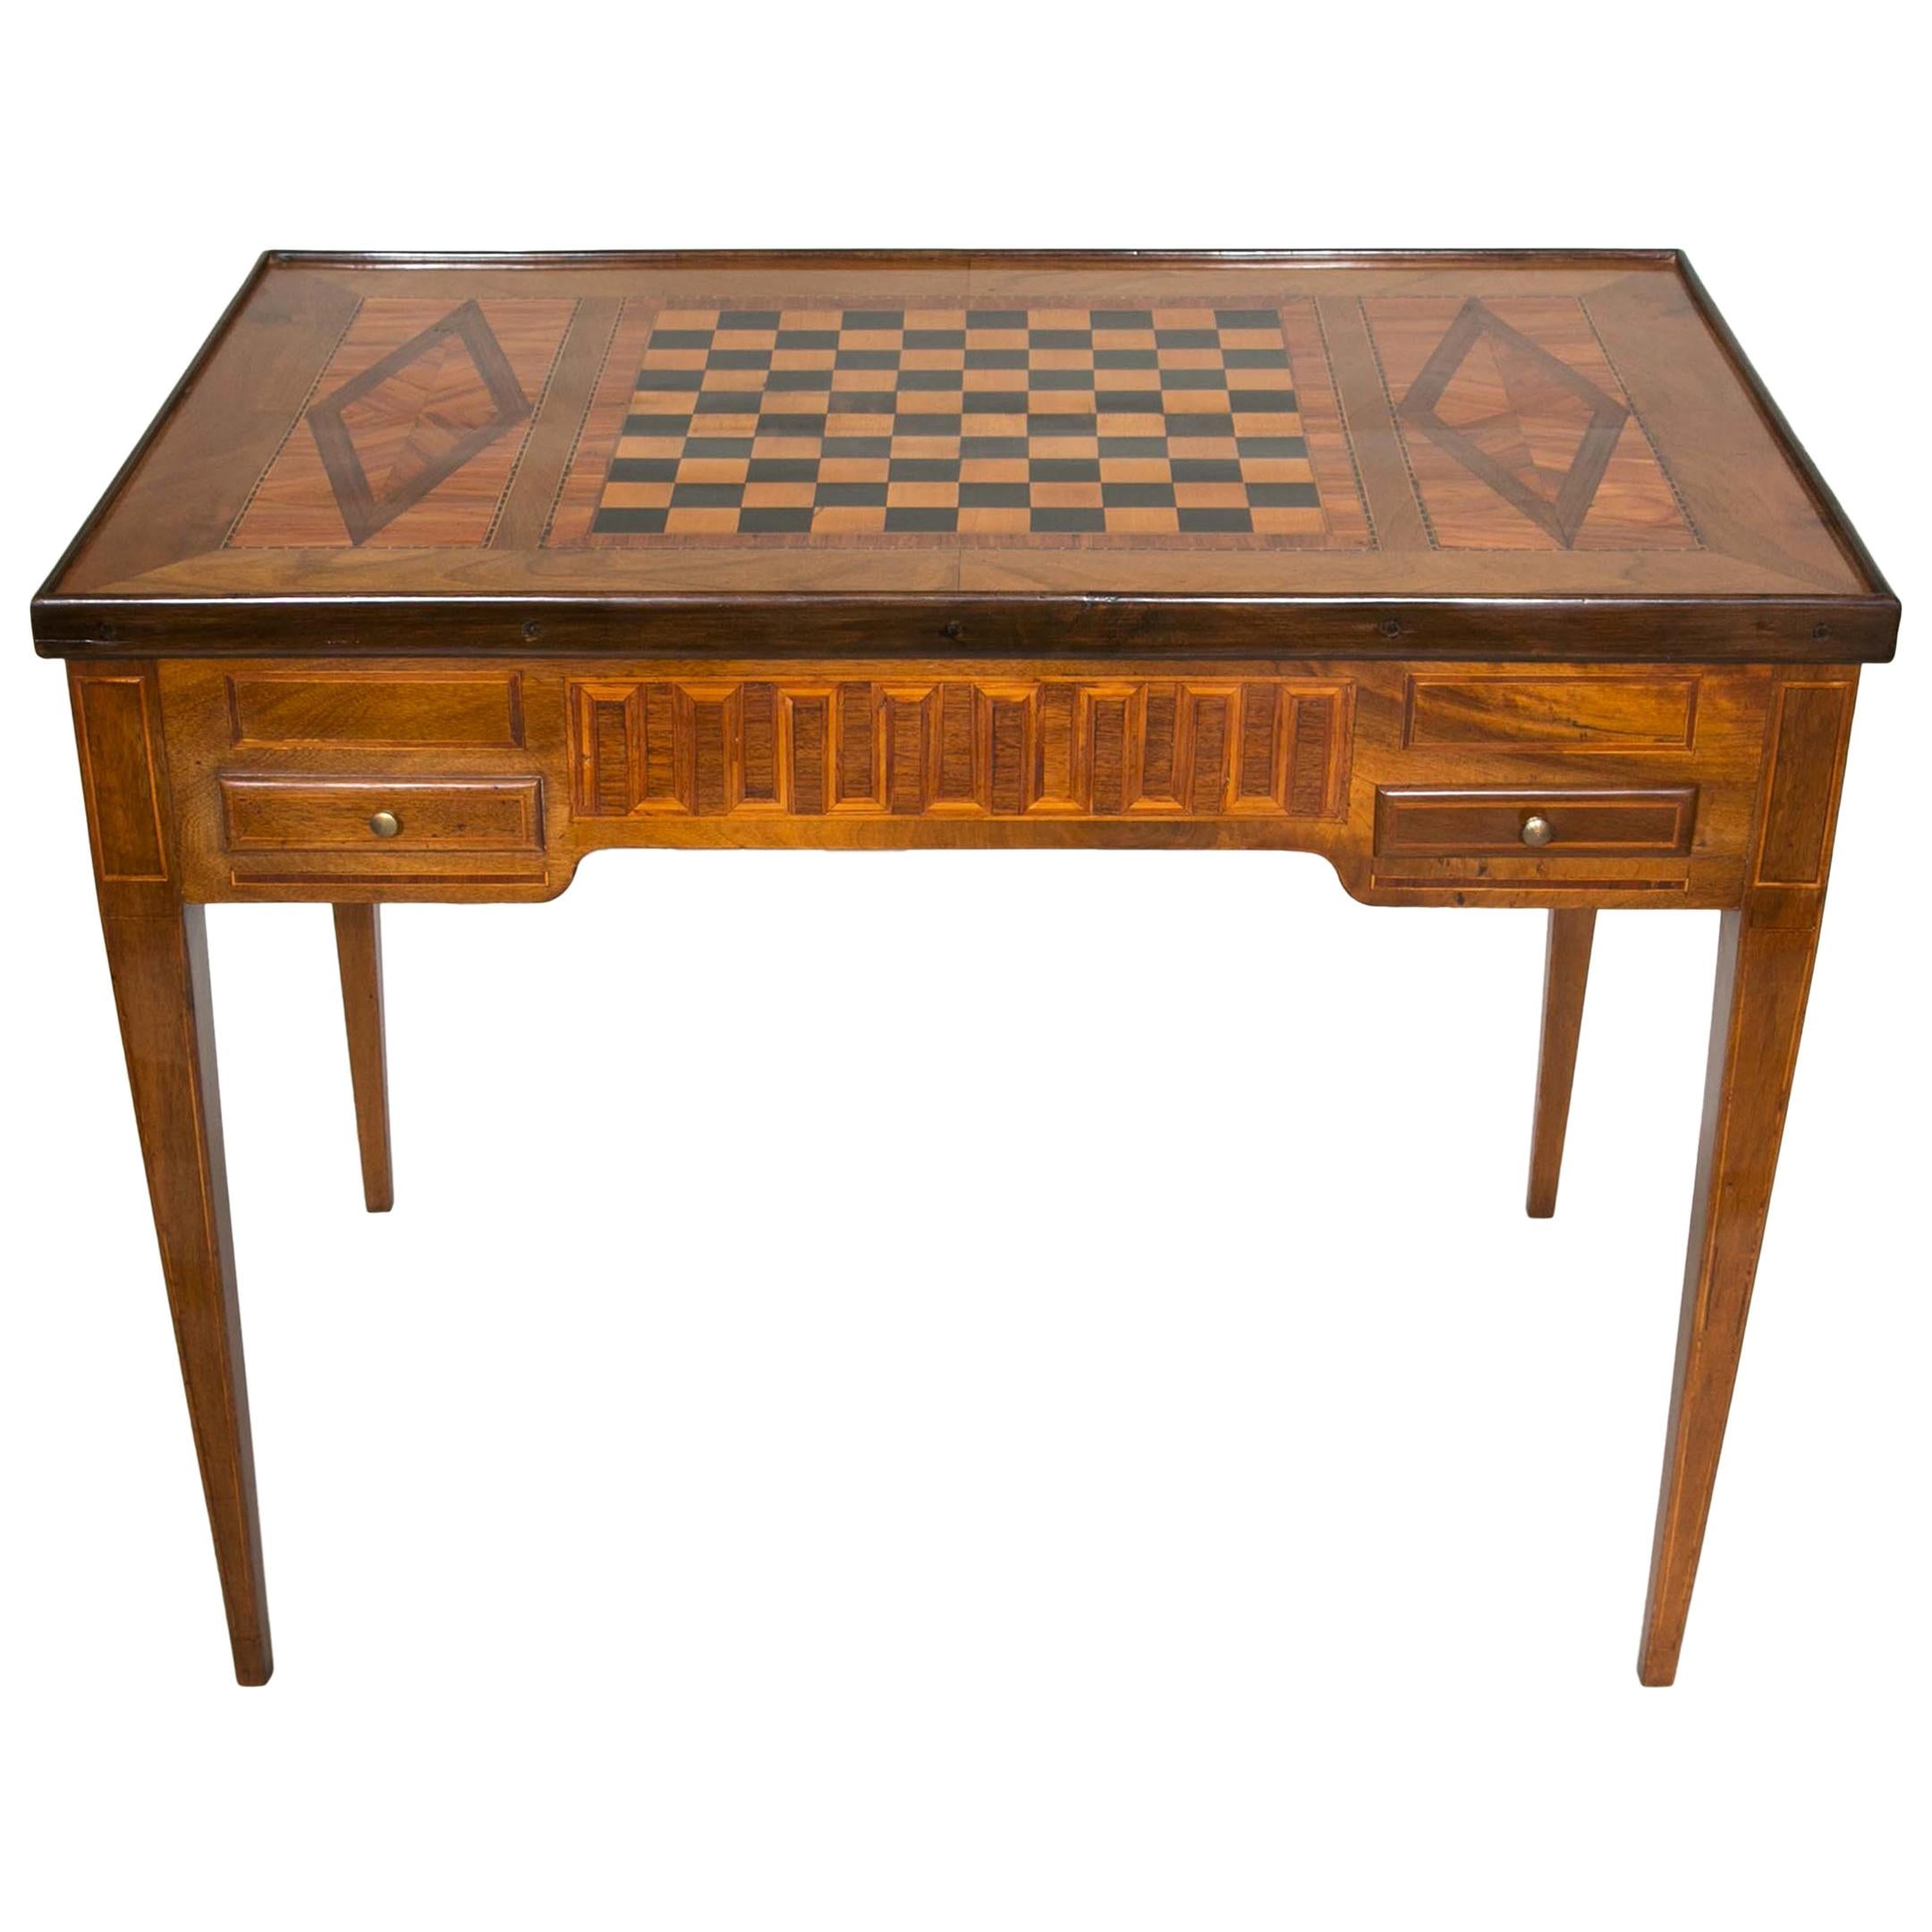 18th Century Games Table in Marquetry of Precious and Rare Woods, Louis XVI